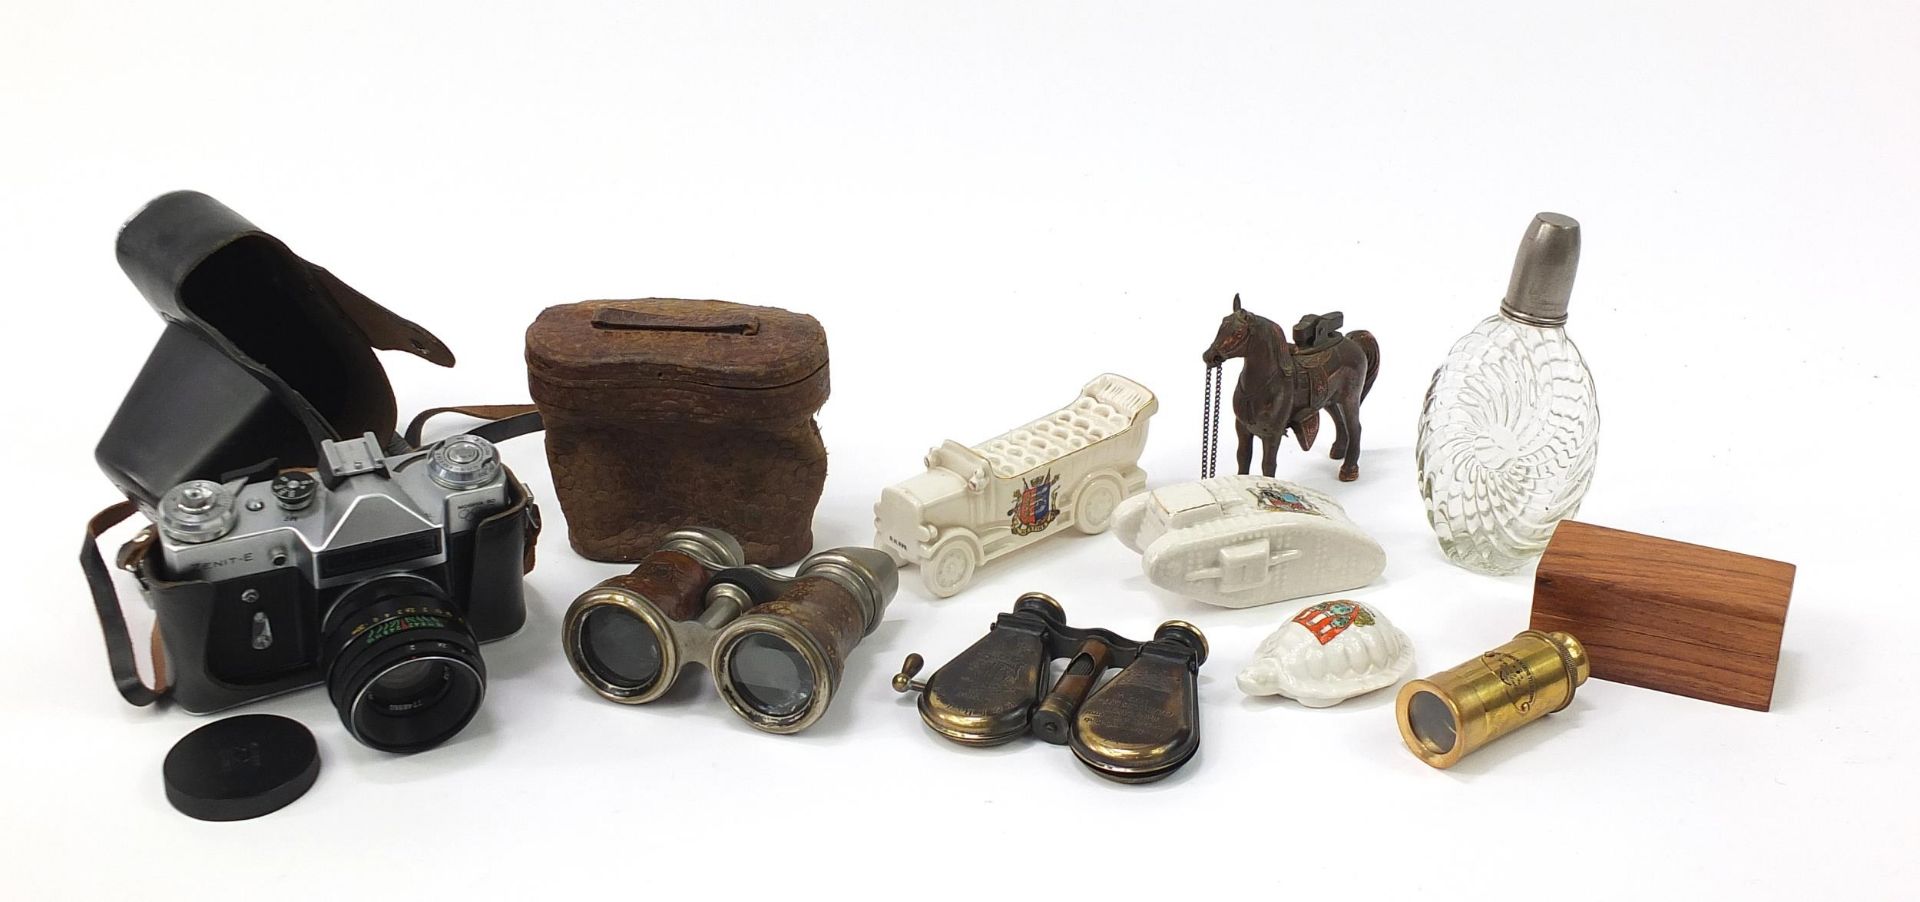 Objects to include a cased Zenith E camera, binoculars, opera glasses, crested ware and novelty